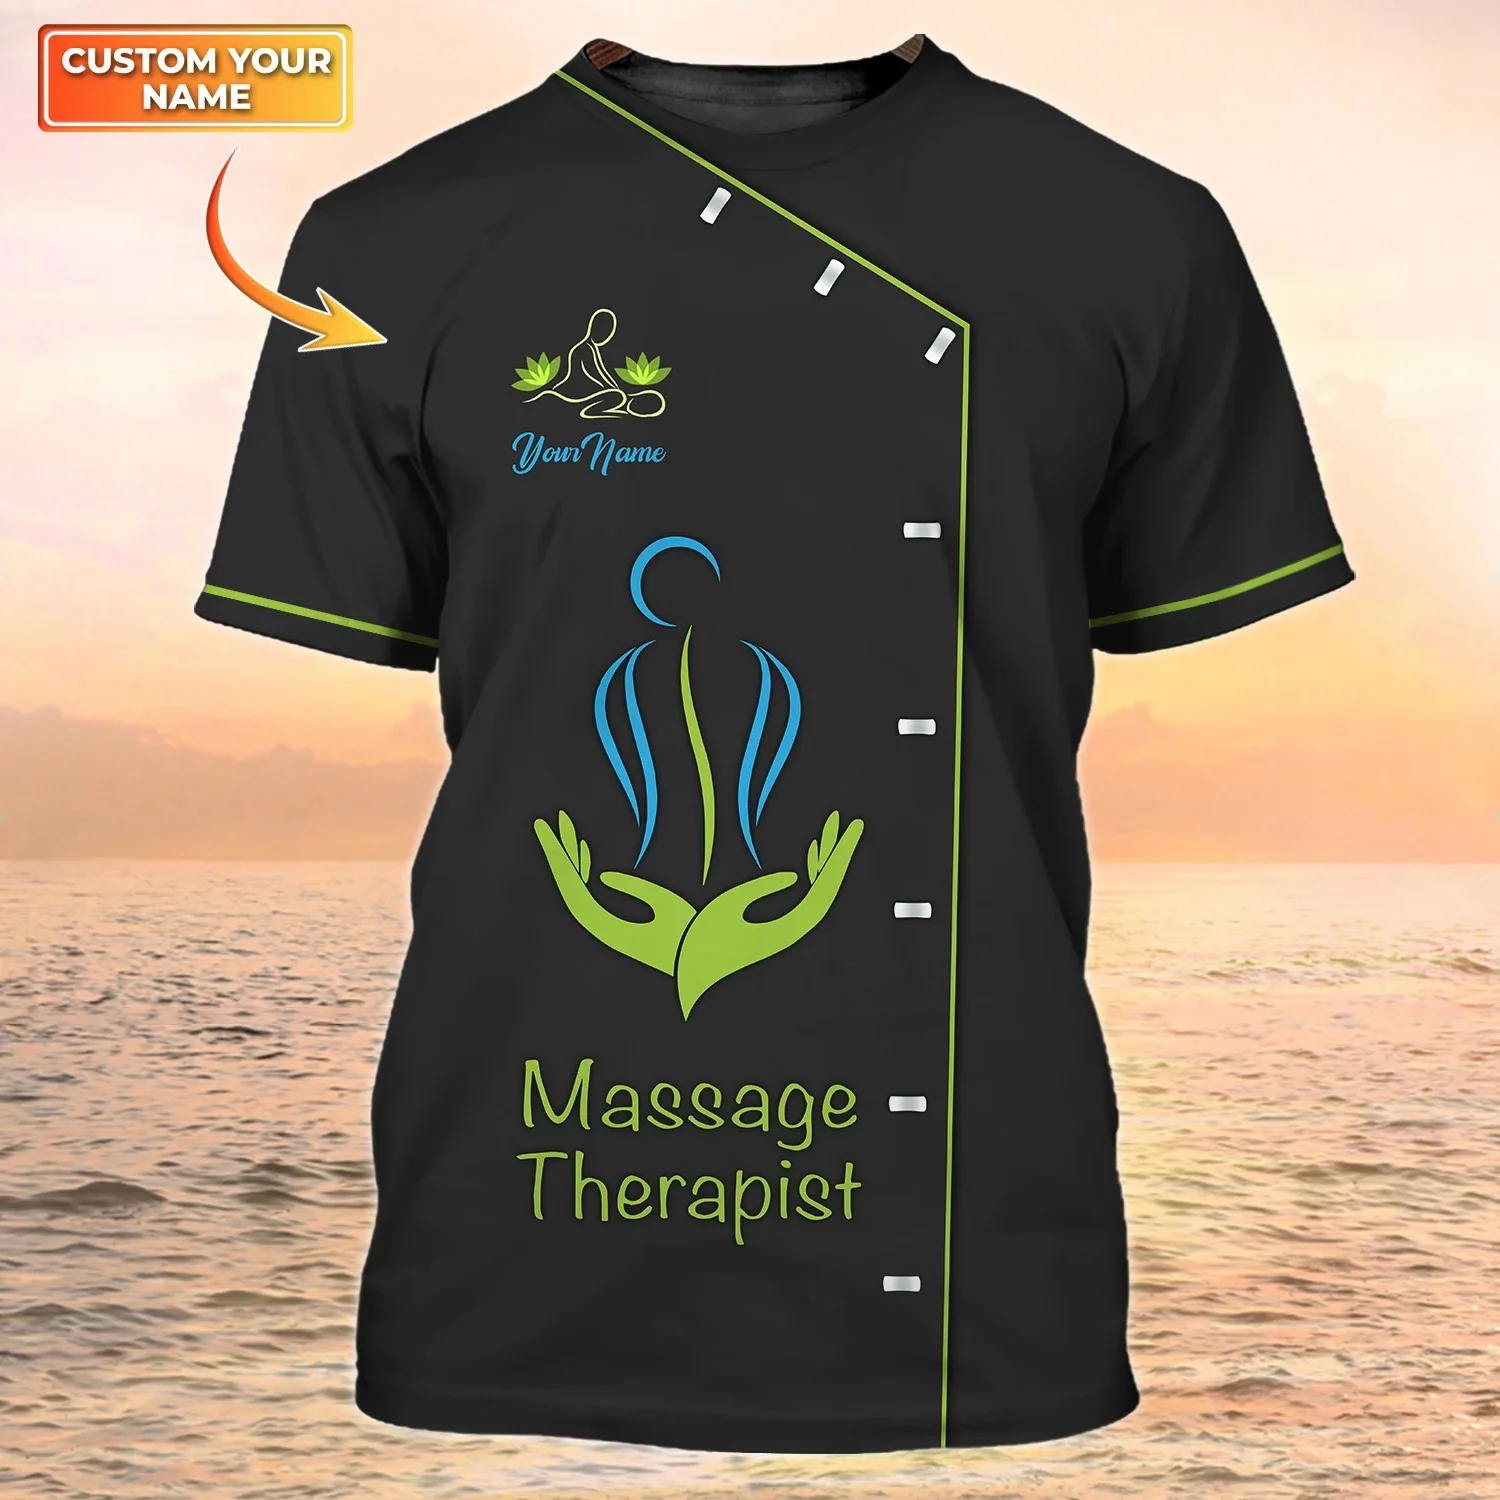 

Summer Men's T-shirt Massage Therapist Pesonalized Name 3D Printed T Shirt Unisex Casual Tops Massage Therapy Apparel DW155